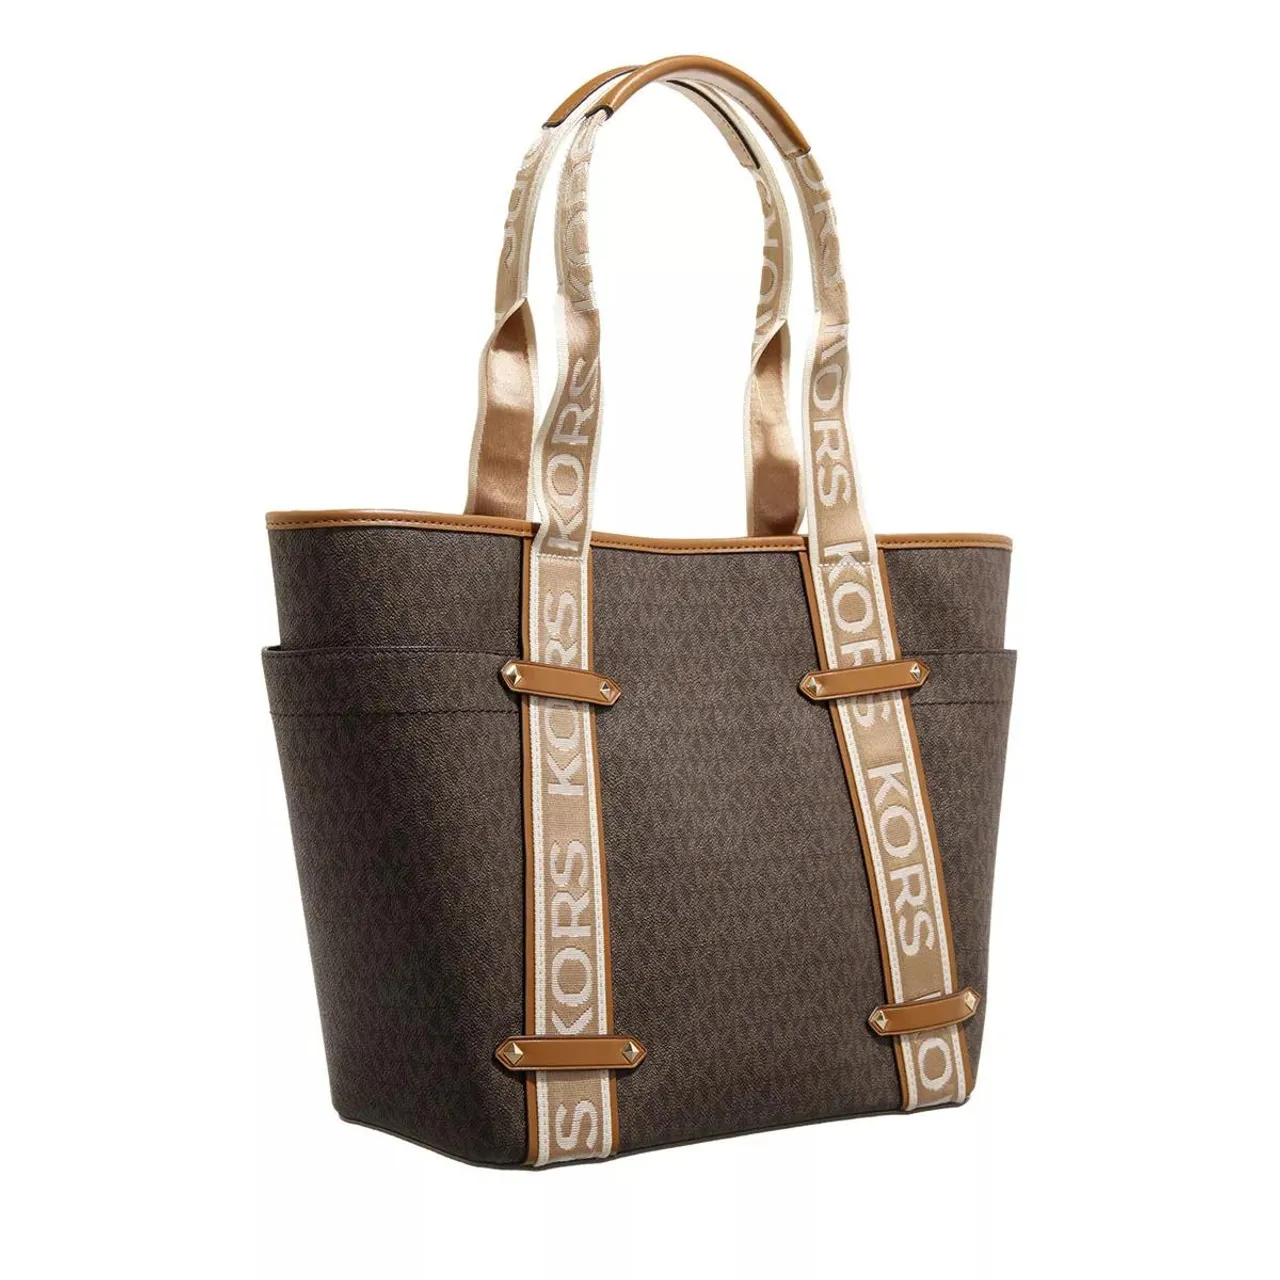 Michael Kors Tote Bags - Maeve Large Open Tote - brown - Tote Bags for ladies